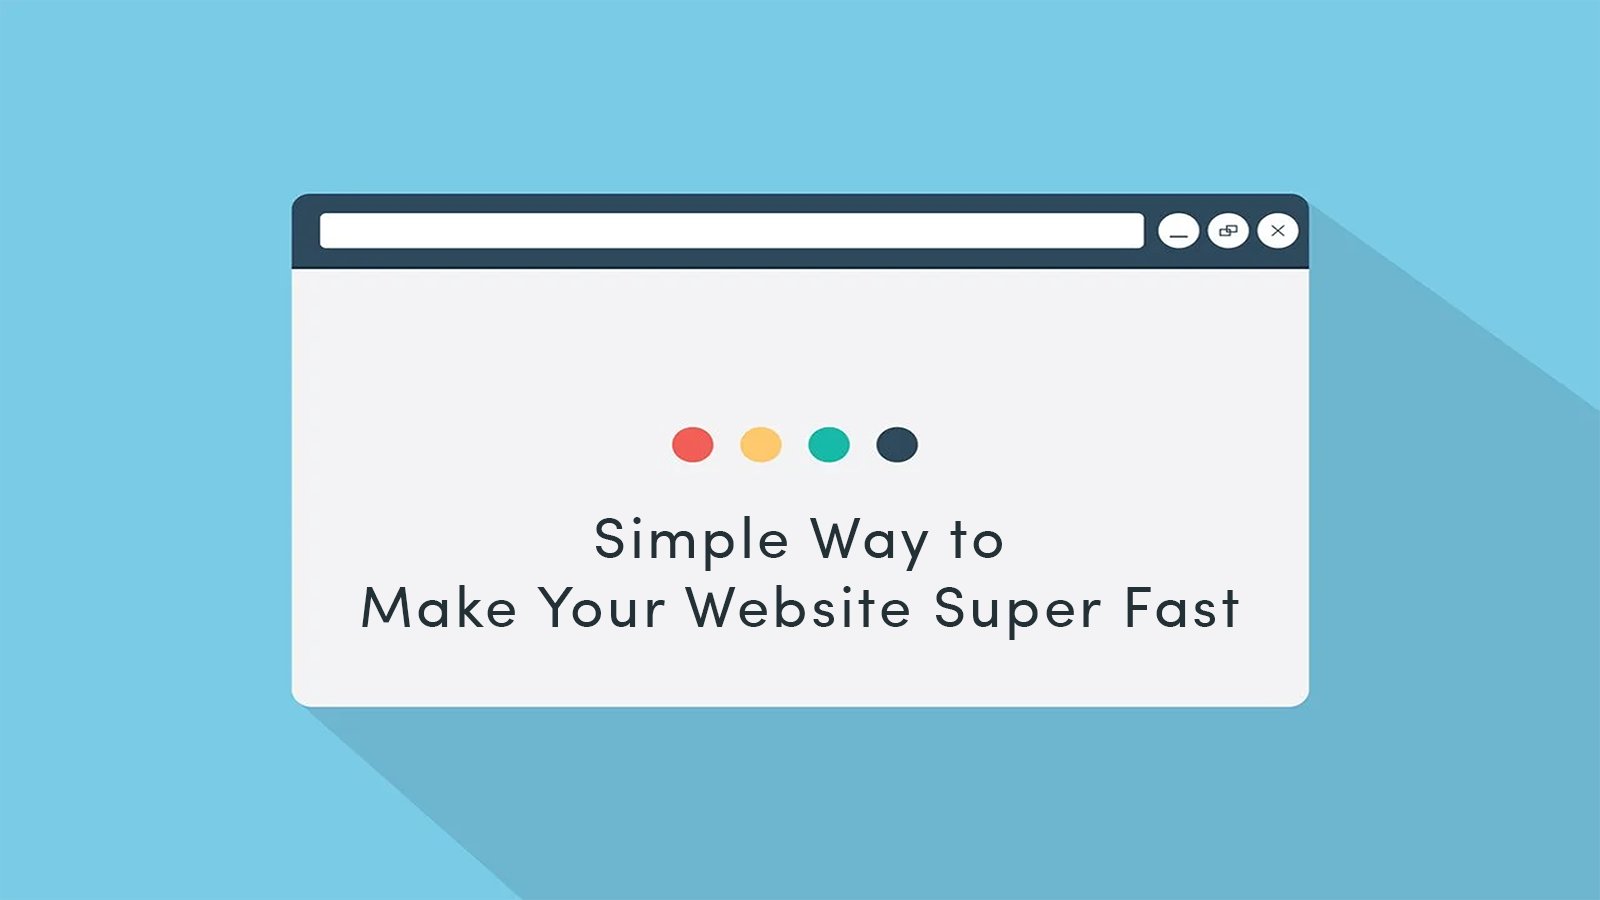 Booster: Page Speed Optimizer - Make your pages feel like they